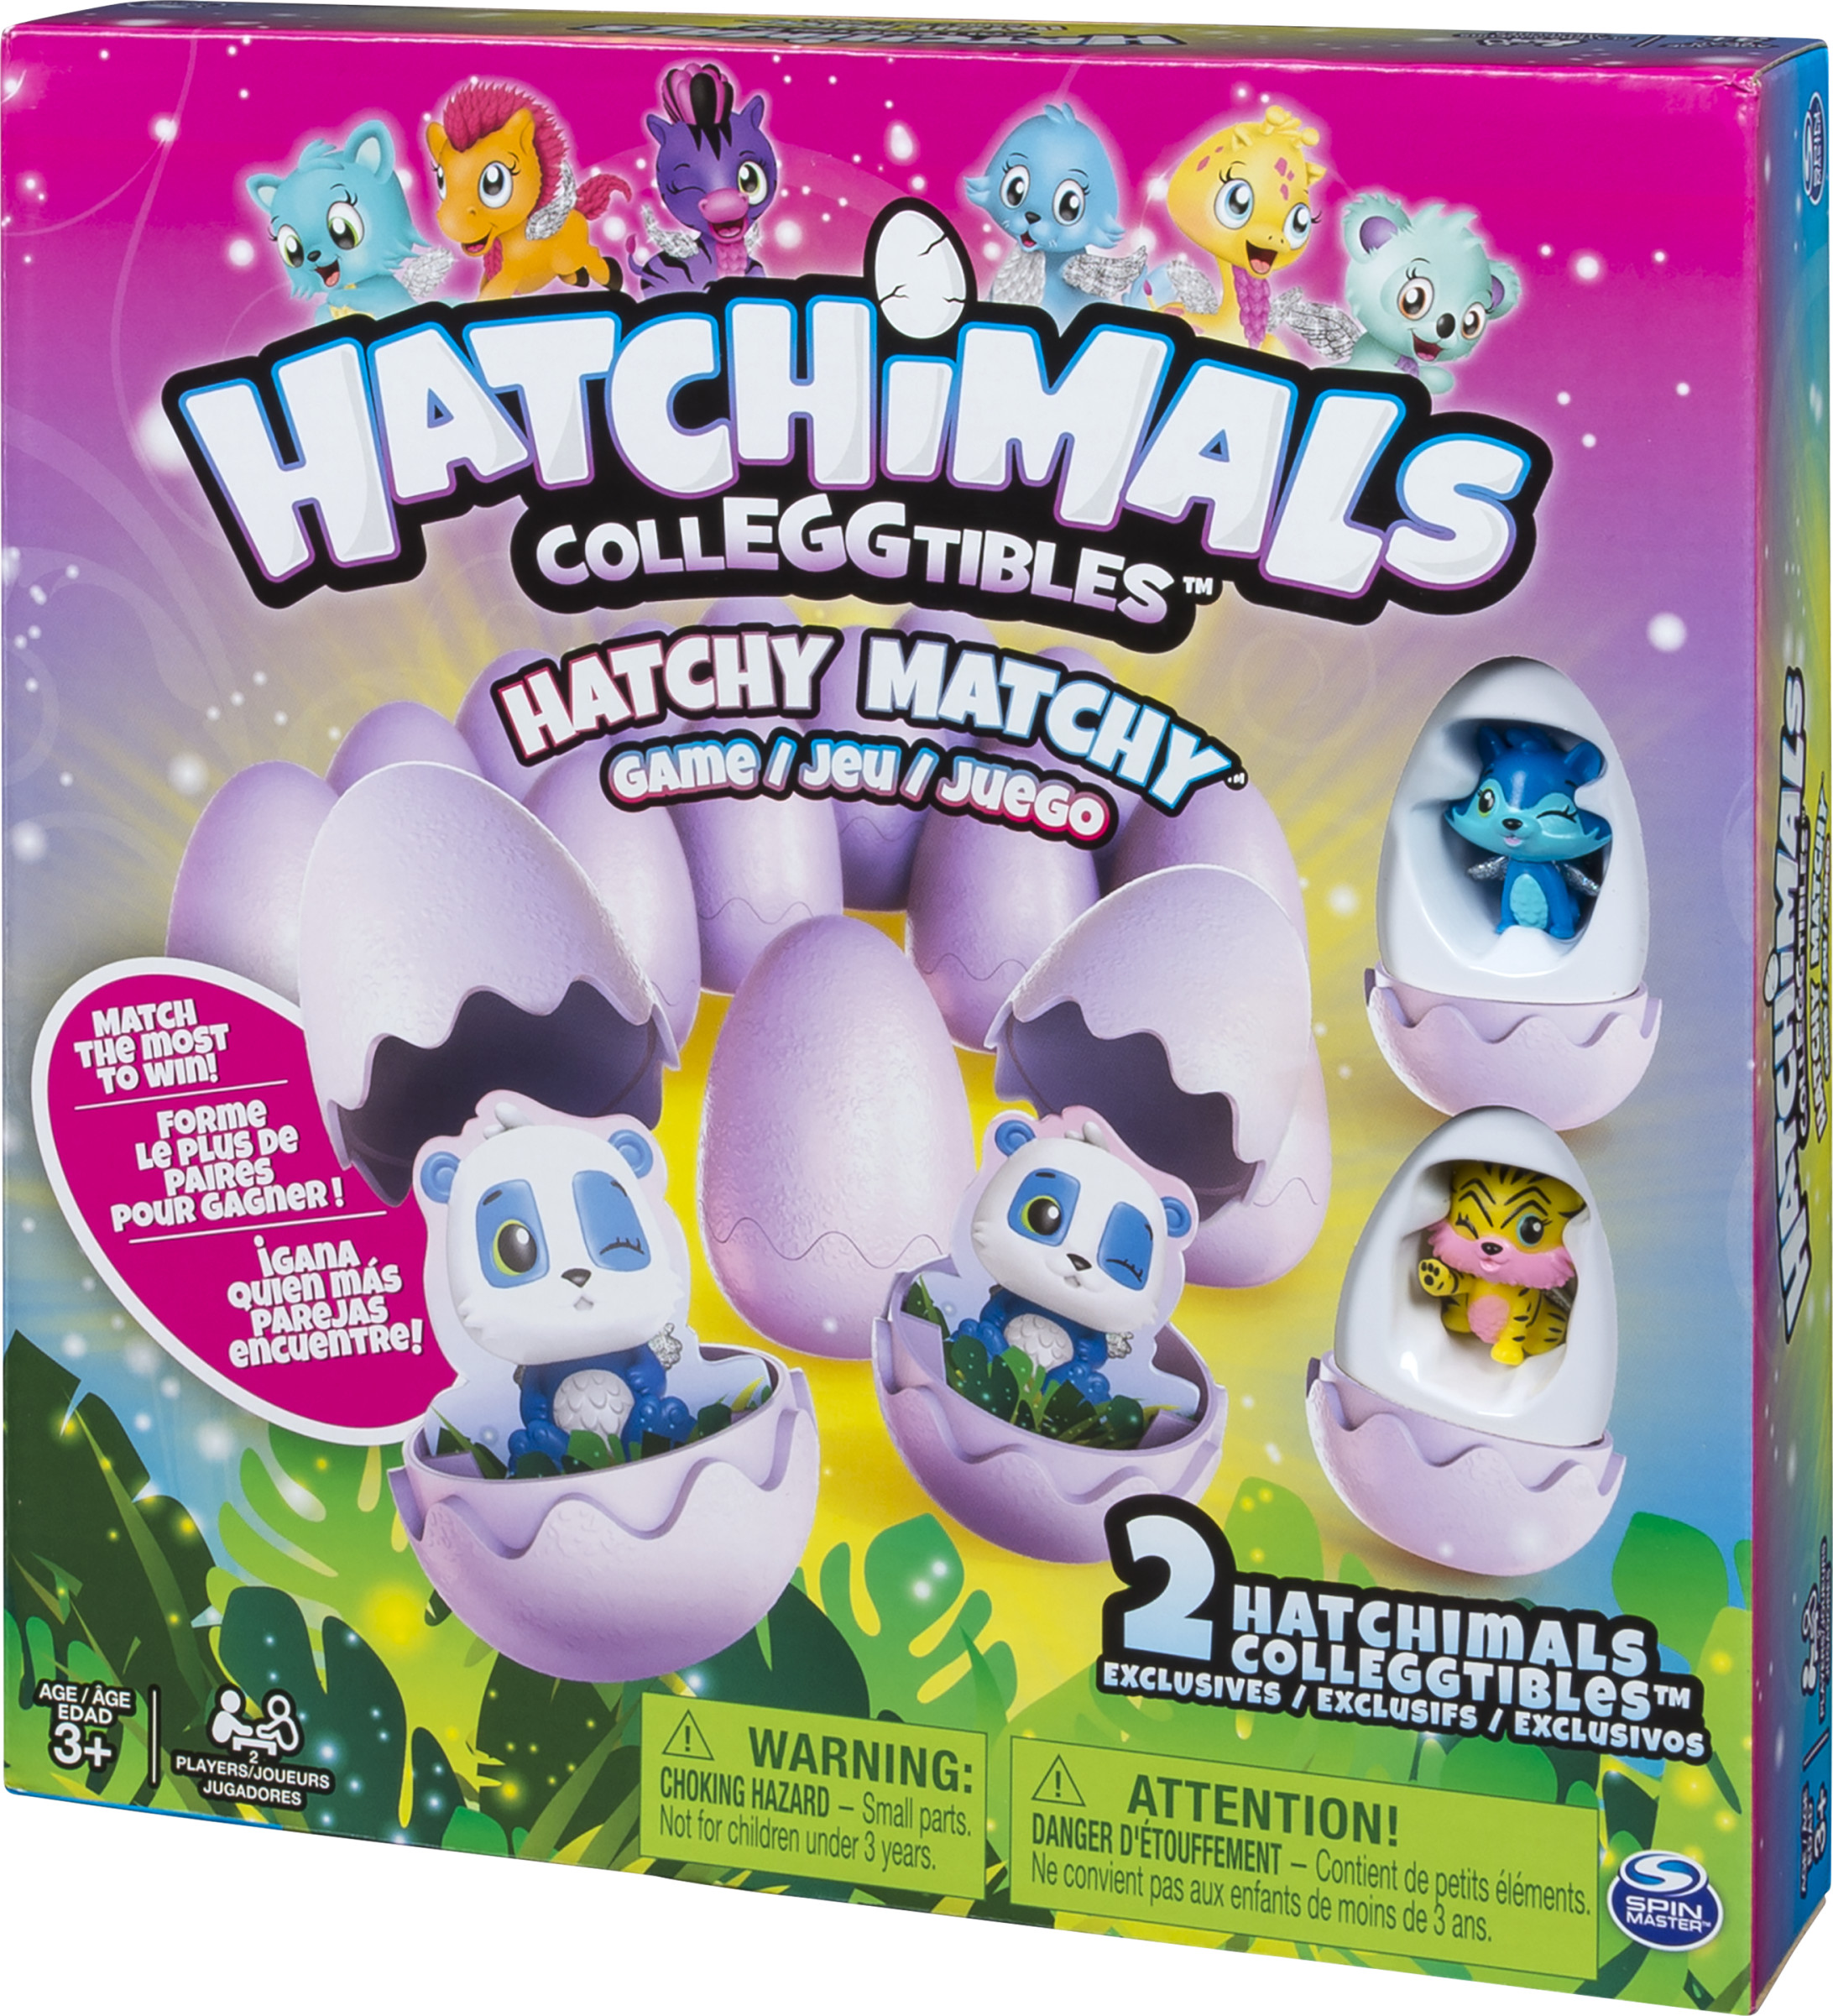 Hatchimals - Hatchy Matchy Game with Two Exclusive CollEGGtibles -Walmart Exclusive - image 4 of 4